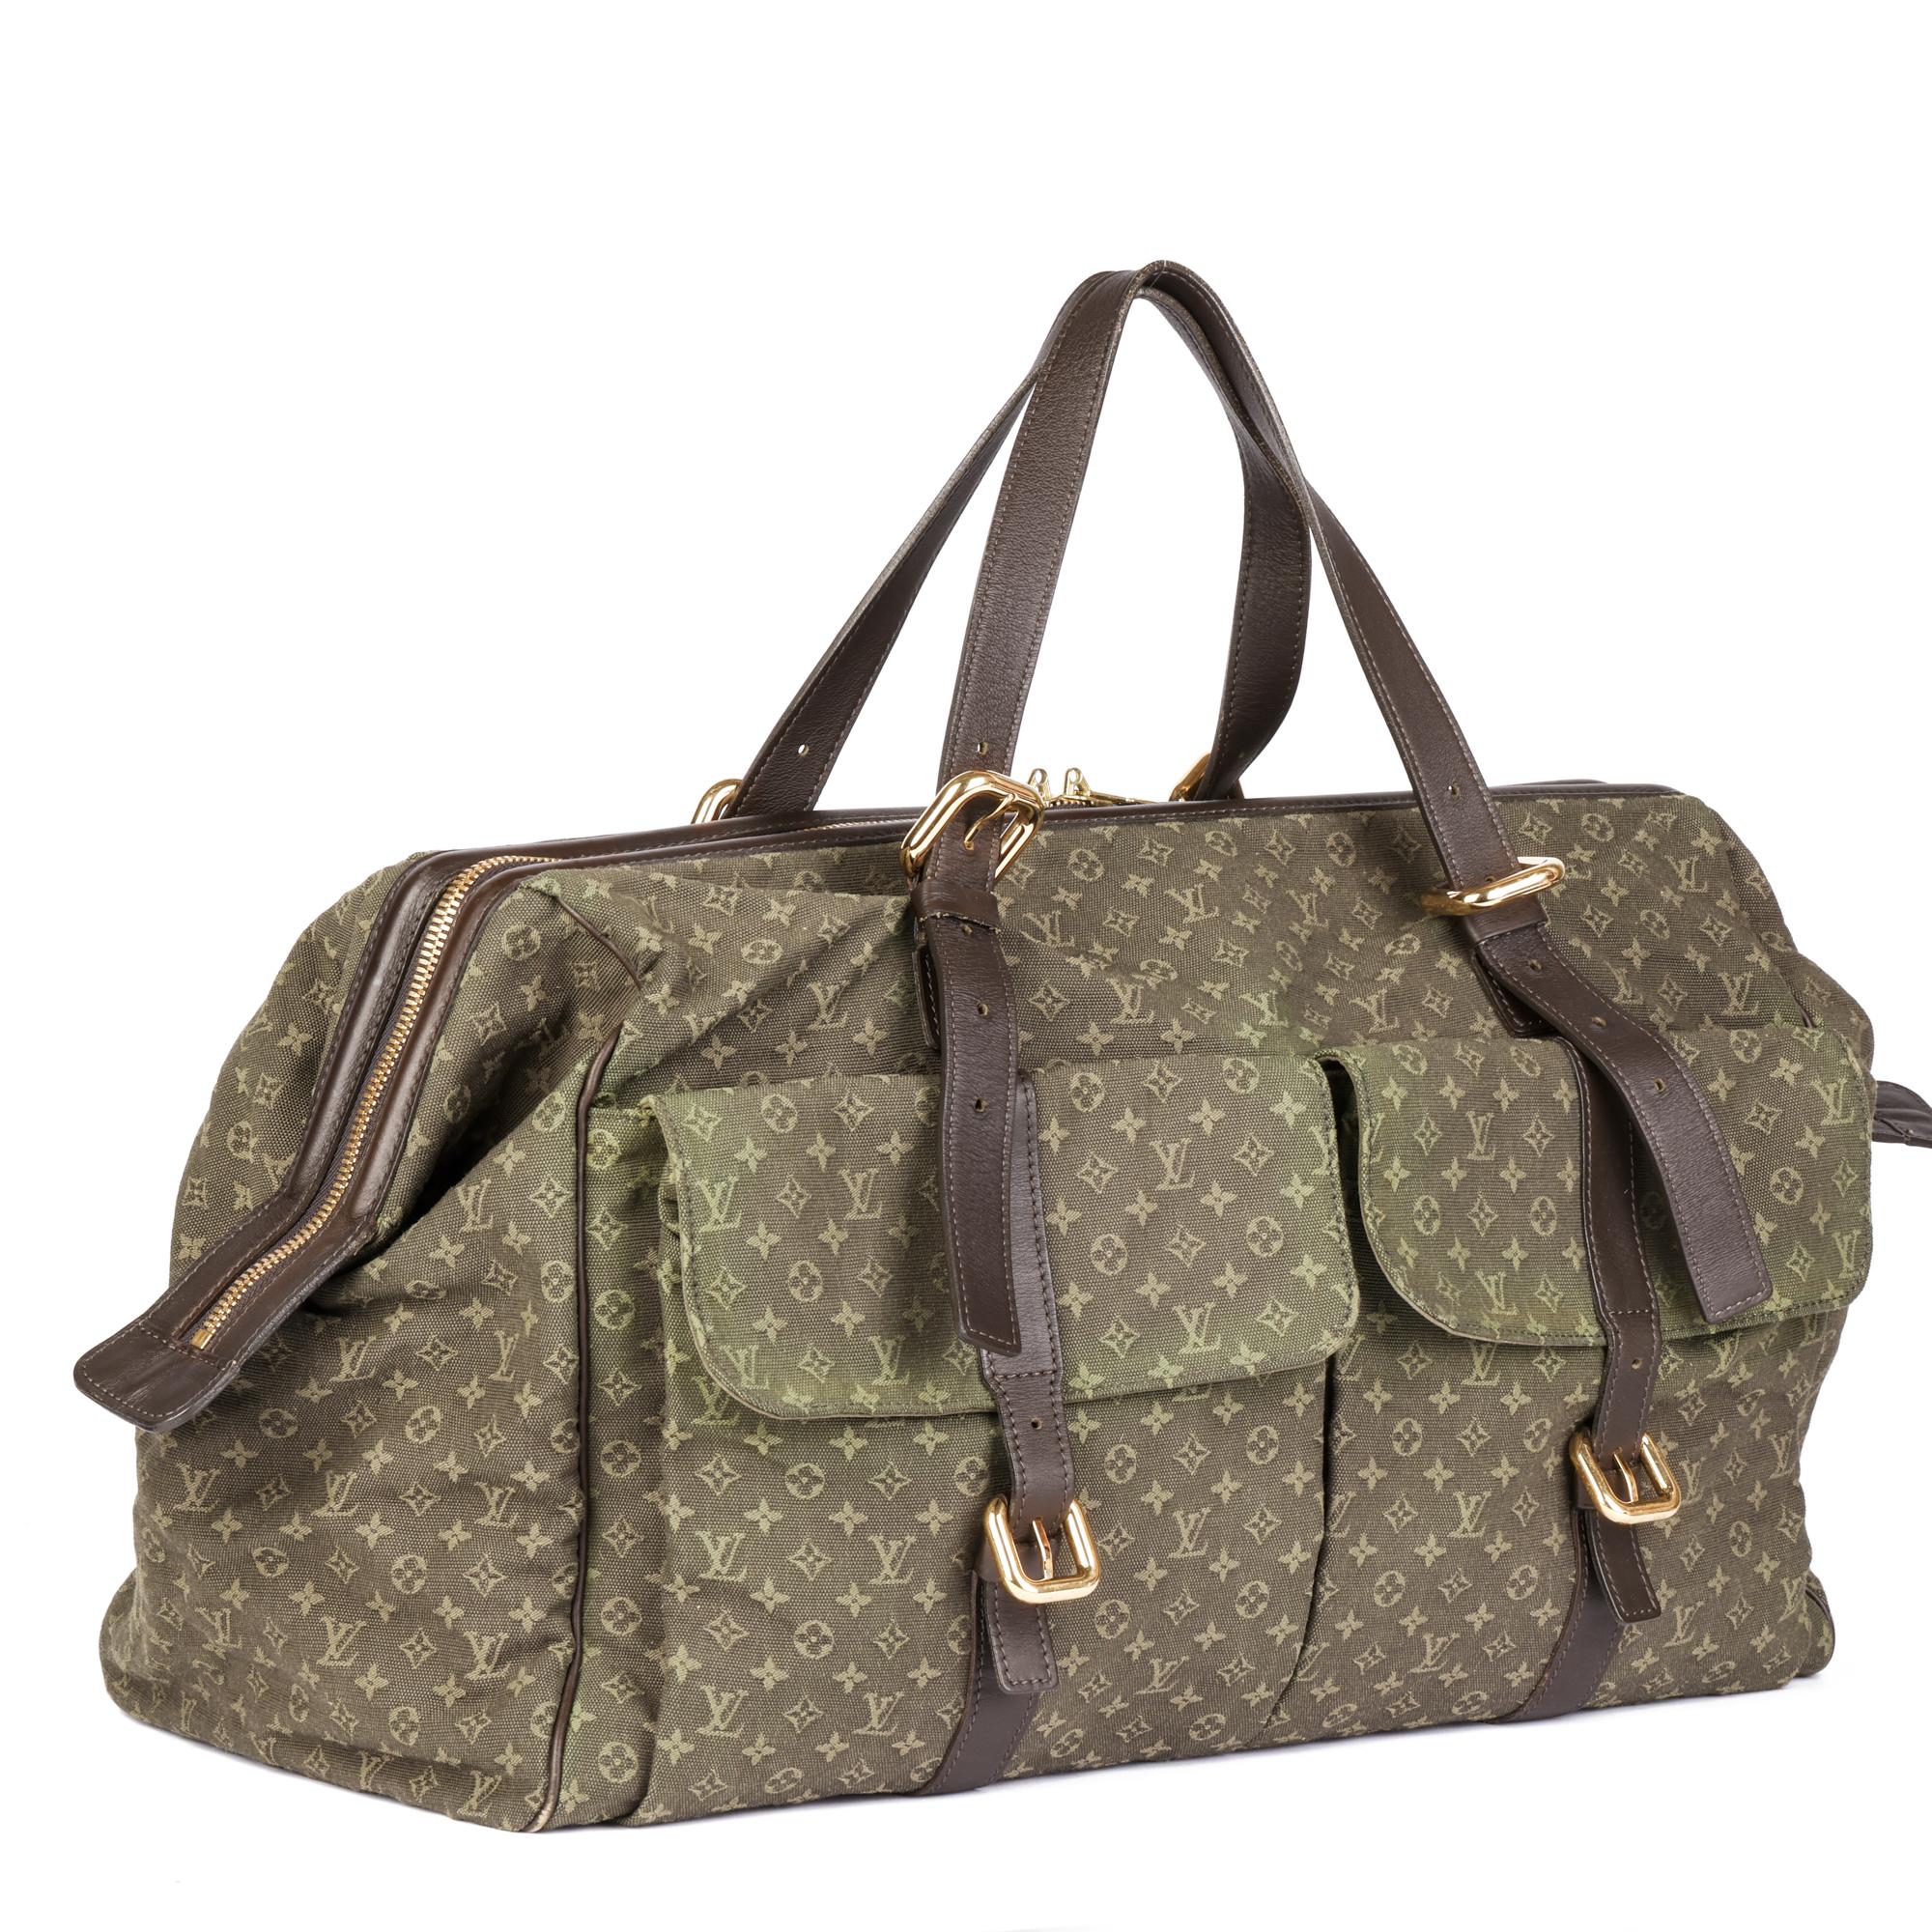 LOUIS VUITTON
Khaki Mini Lin Monogram Linen & Brown Calfskin Leather Vintage Louise

Serial Number: VI 0032
Age (Circa): 2002
Authenticity Details: Date Stamp (Made in France)
Gender: Ladies
Type: Travel

Colour: Khaki
Hardware: Gold
Material(s):